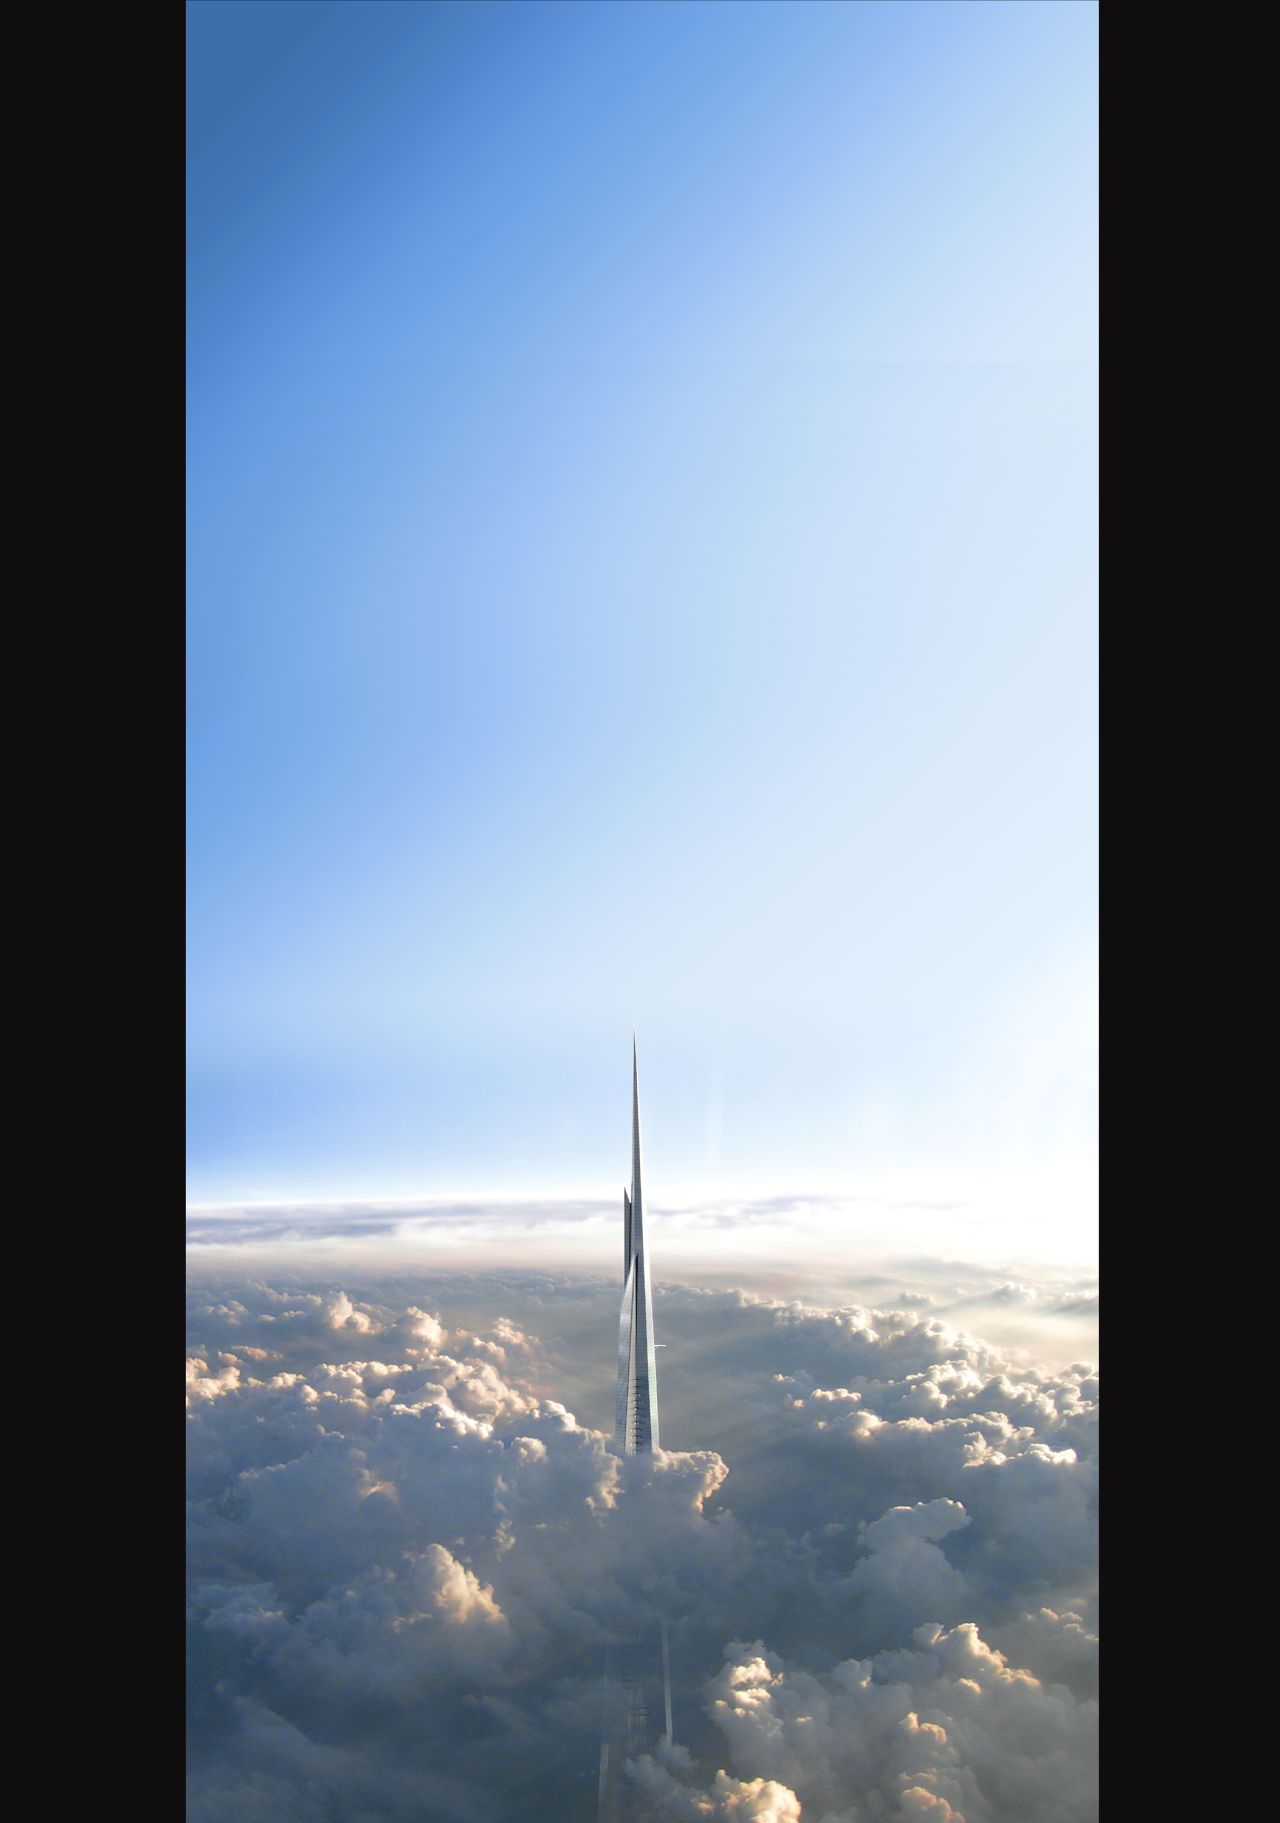 Saudi Arabia's Kingdom Tower is also planned to reach one kilometer into the sky, but is not due for completion until 2019.